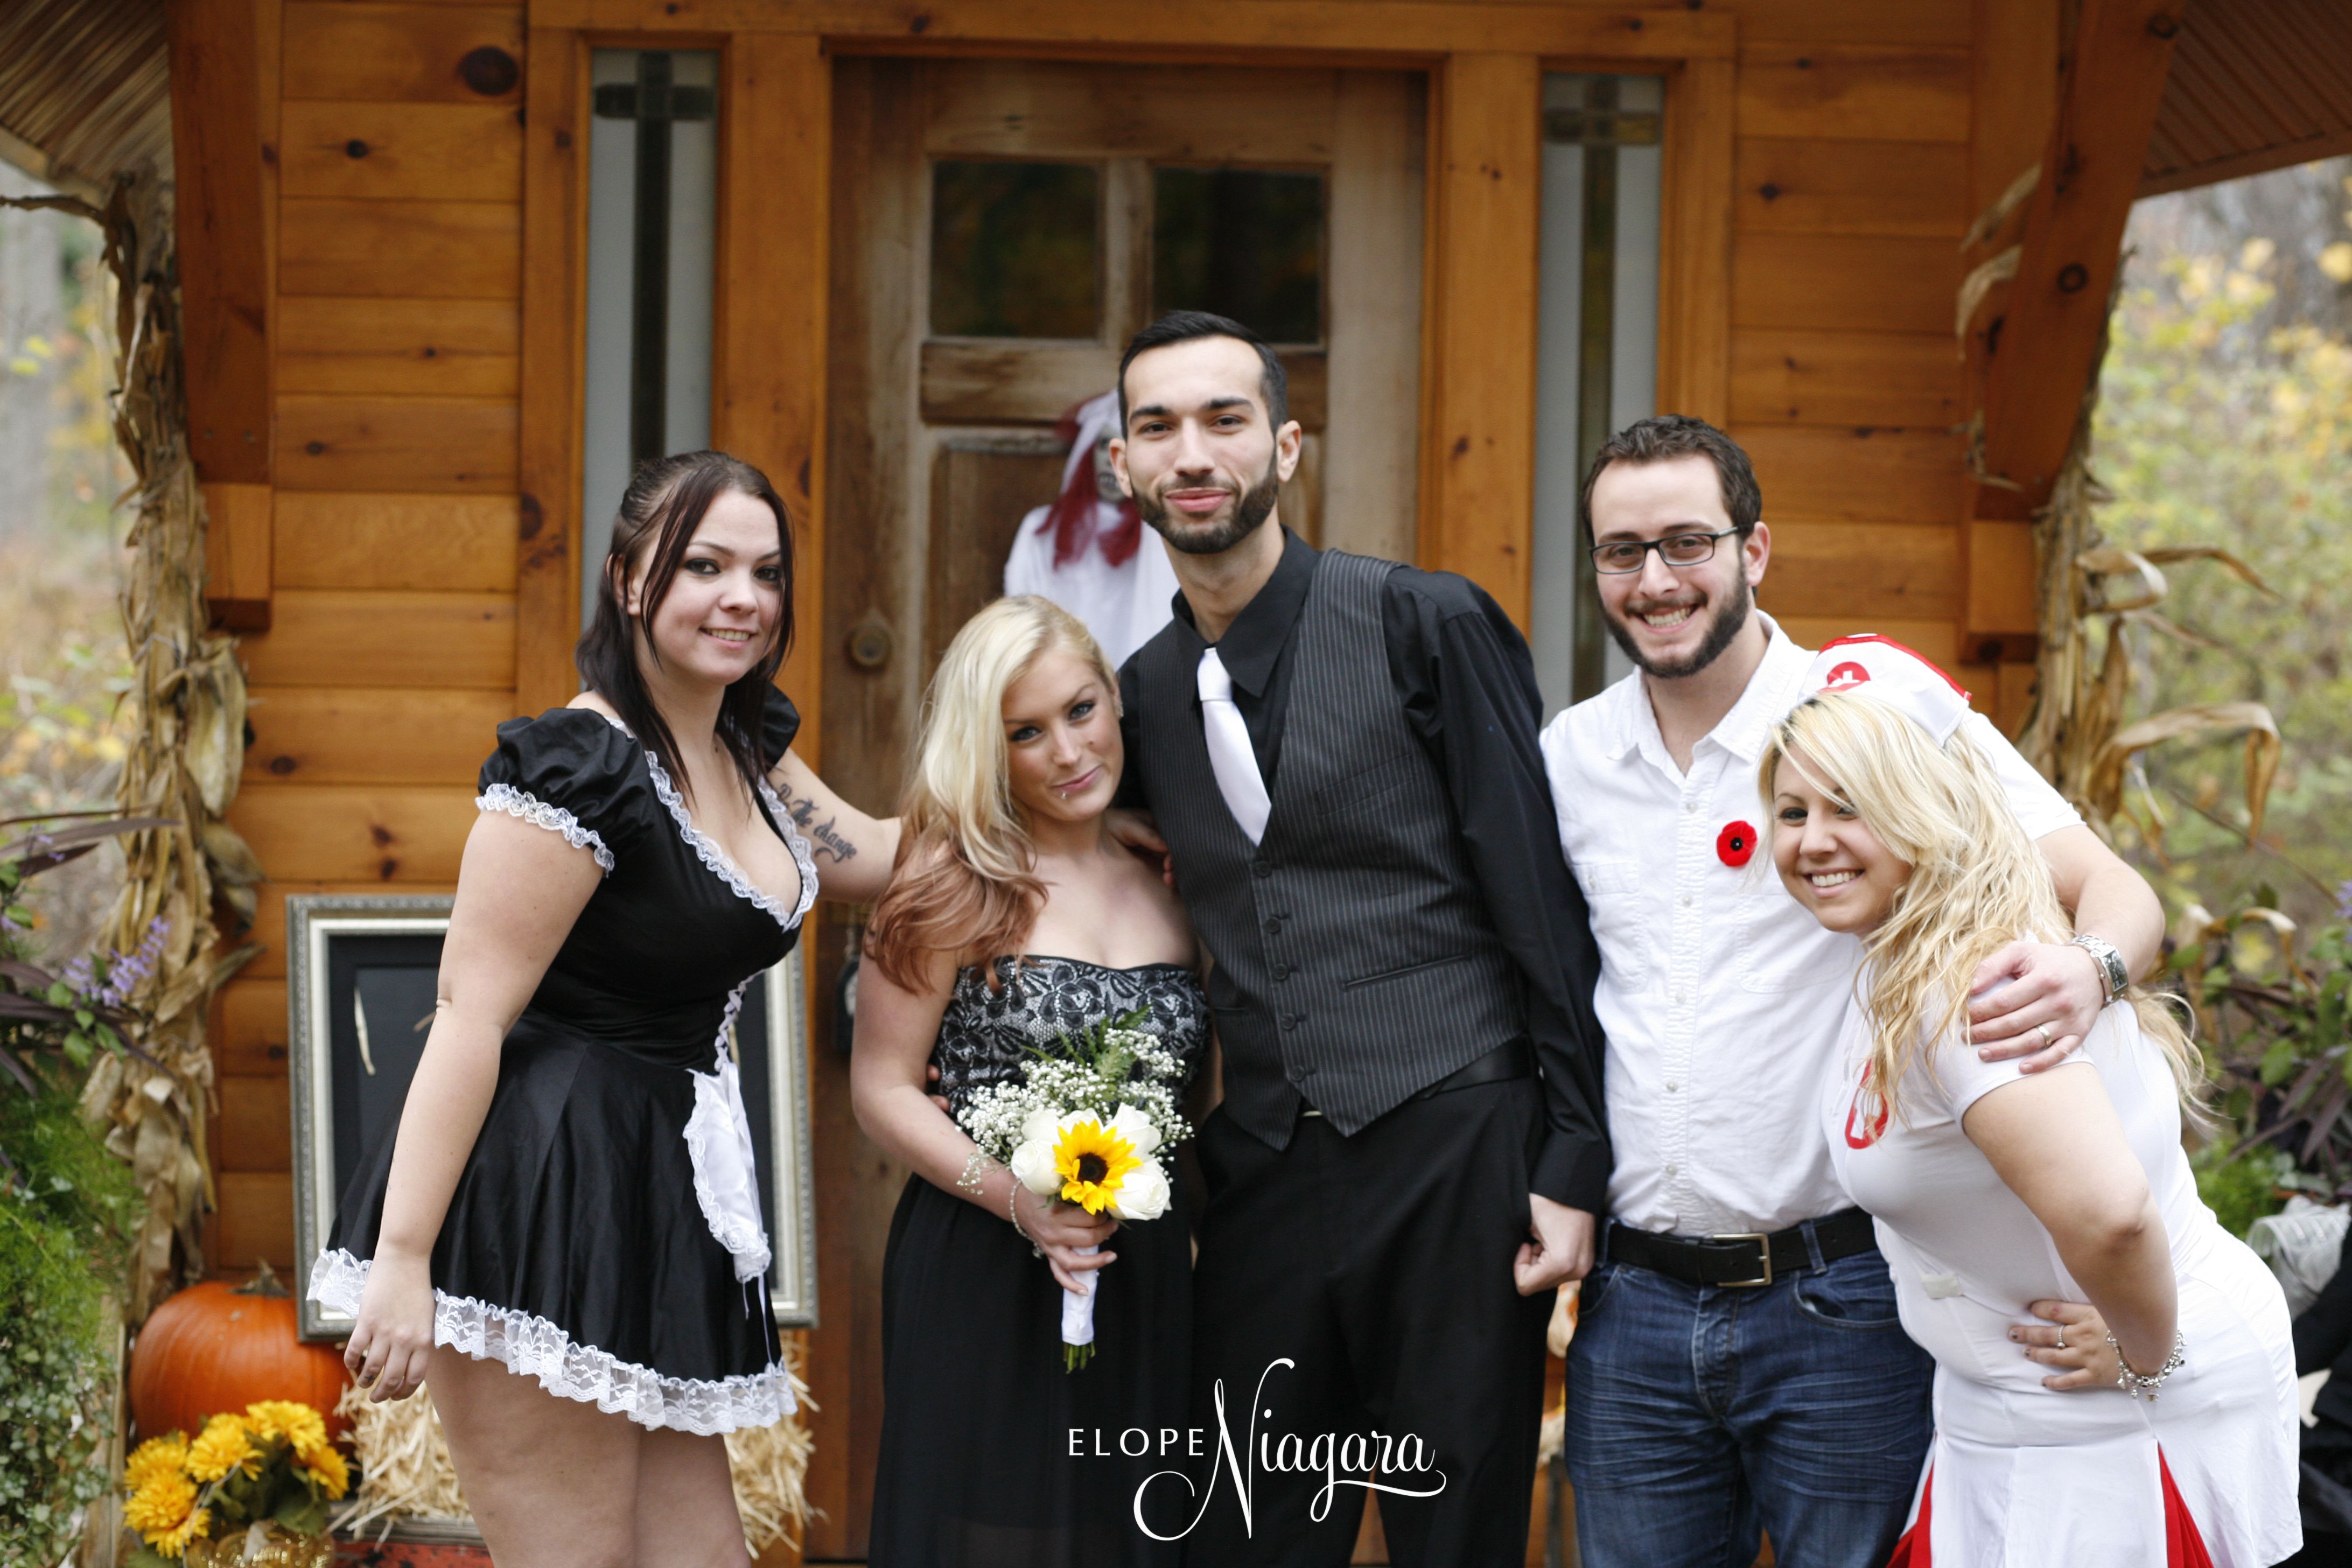 Halloween weddings are so much fun at The Little Log Wedding Chapel ...